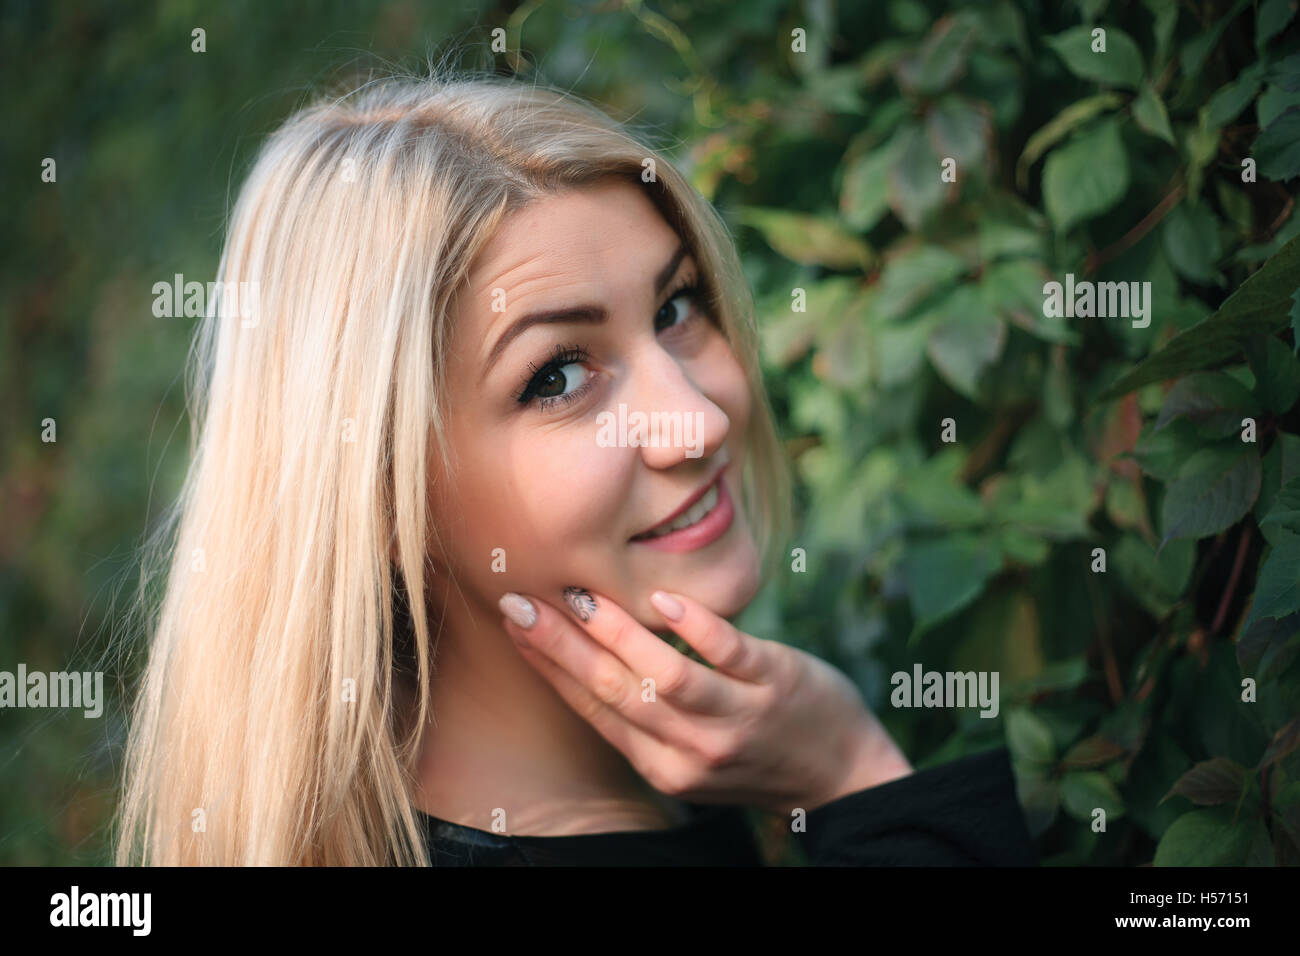 Portrait of an attractive young woman on a background of green ivy leaves Stock Photo